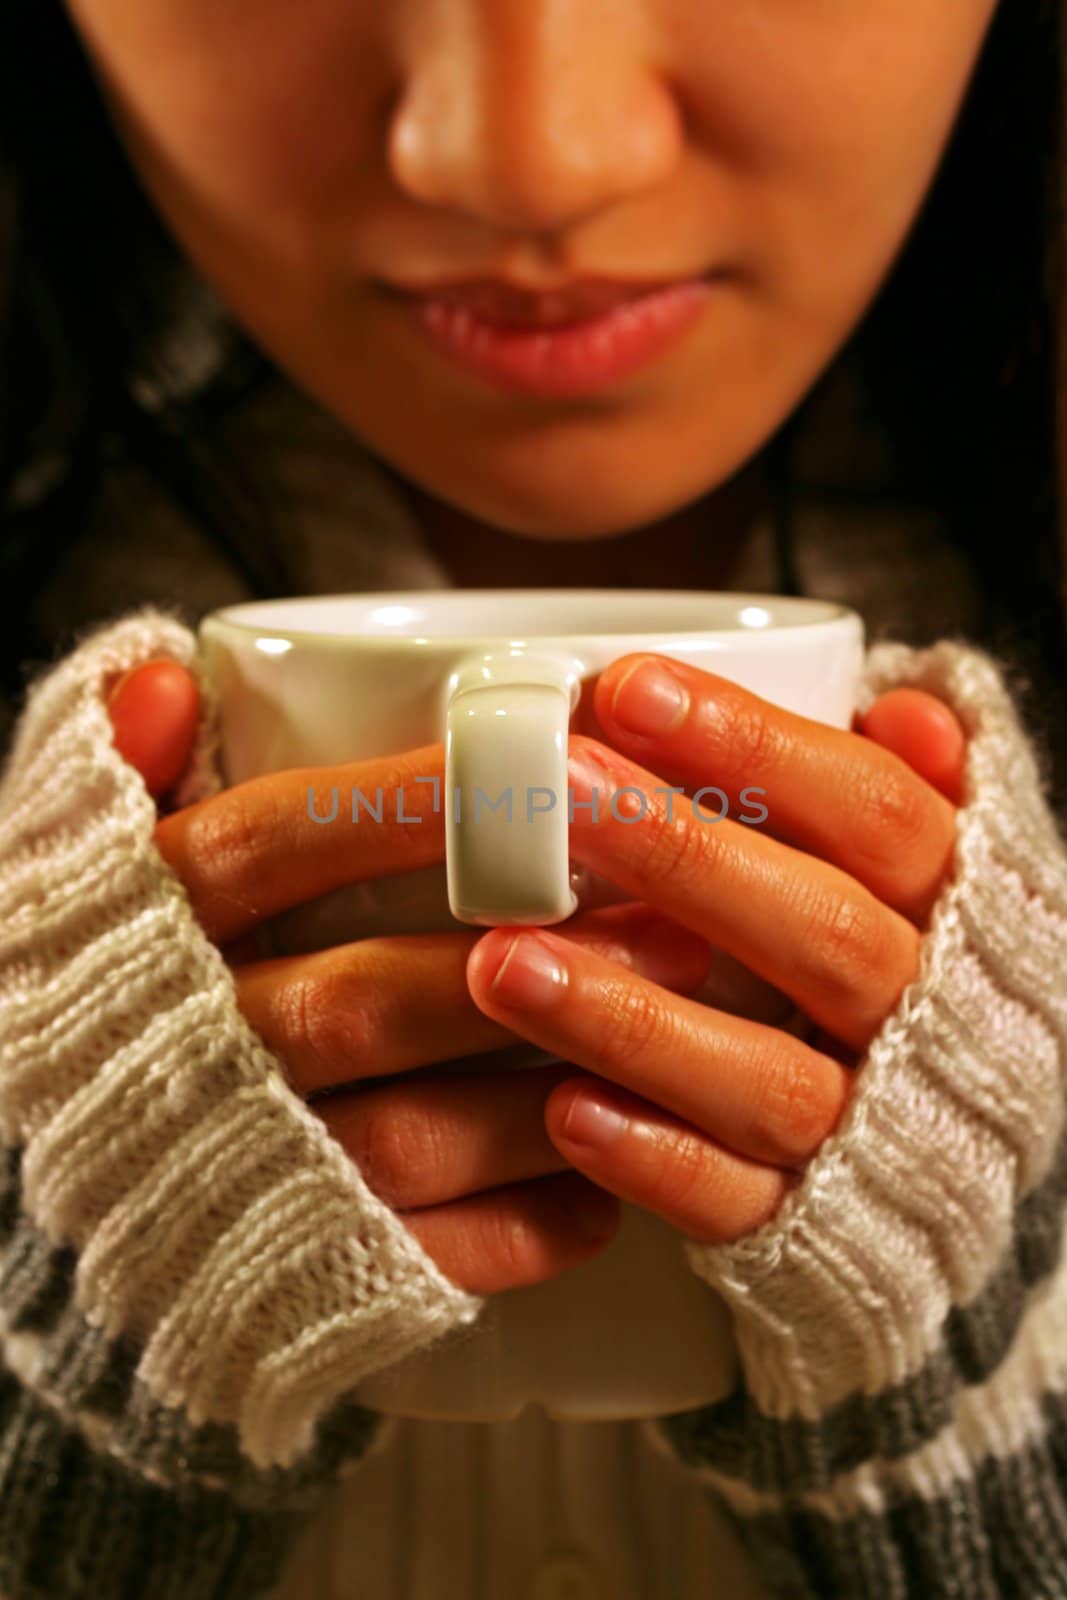 A woman holding a cup of coffee